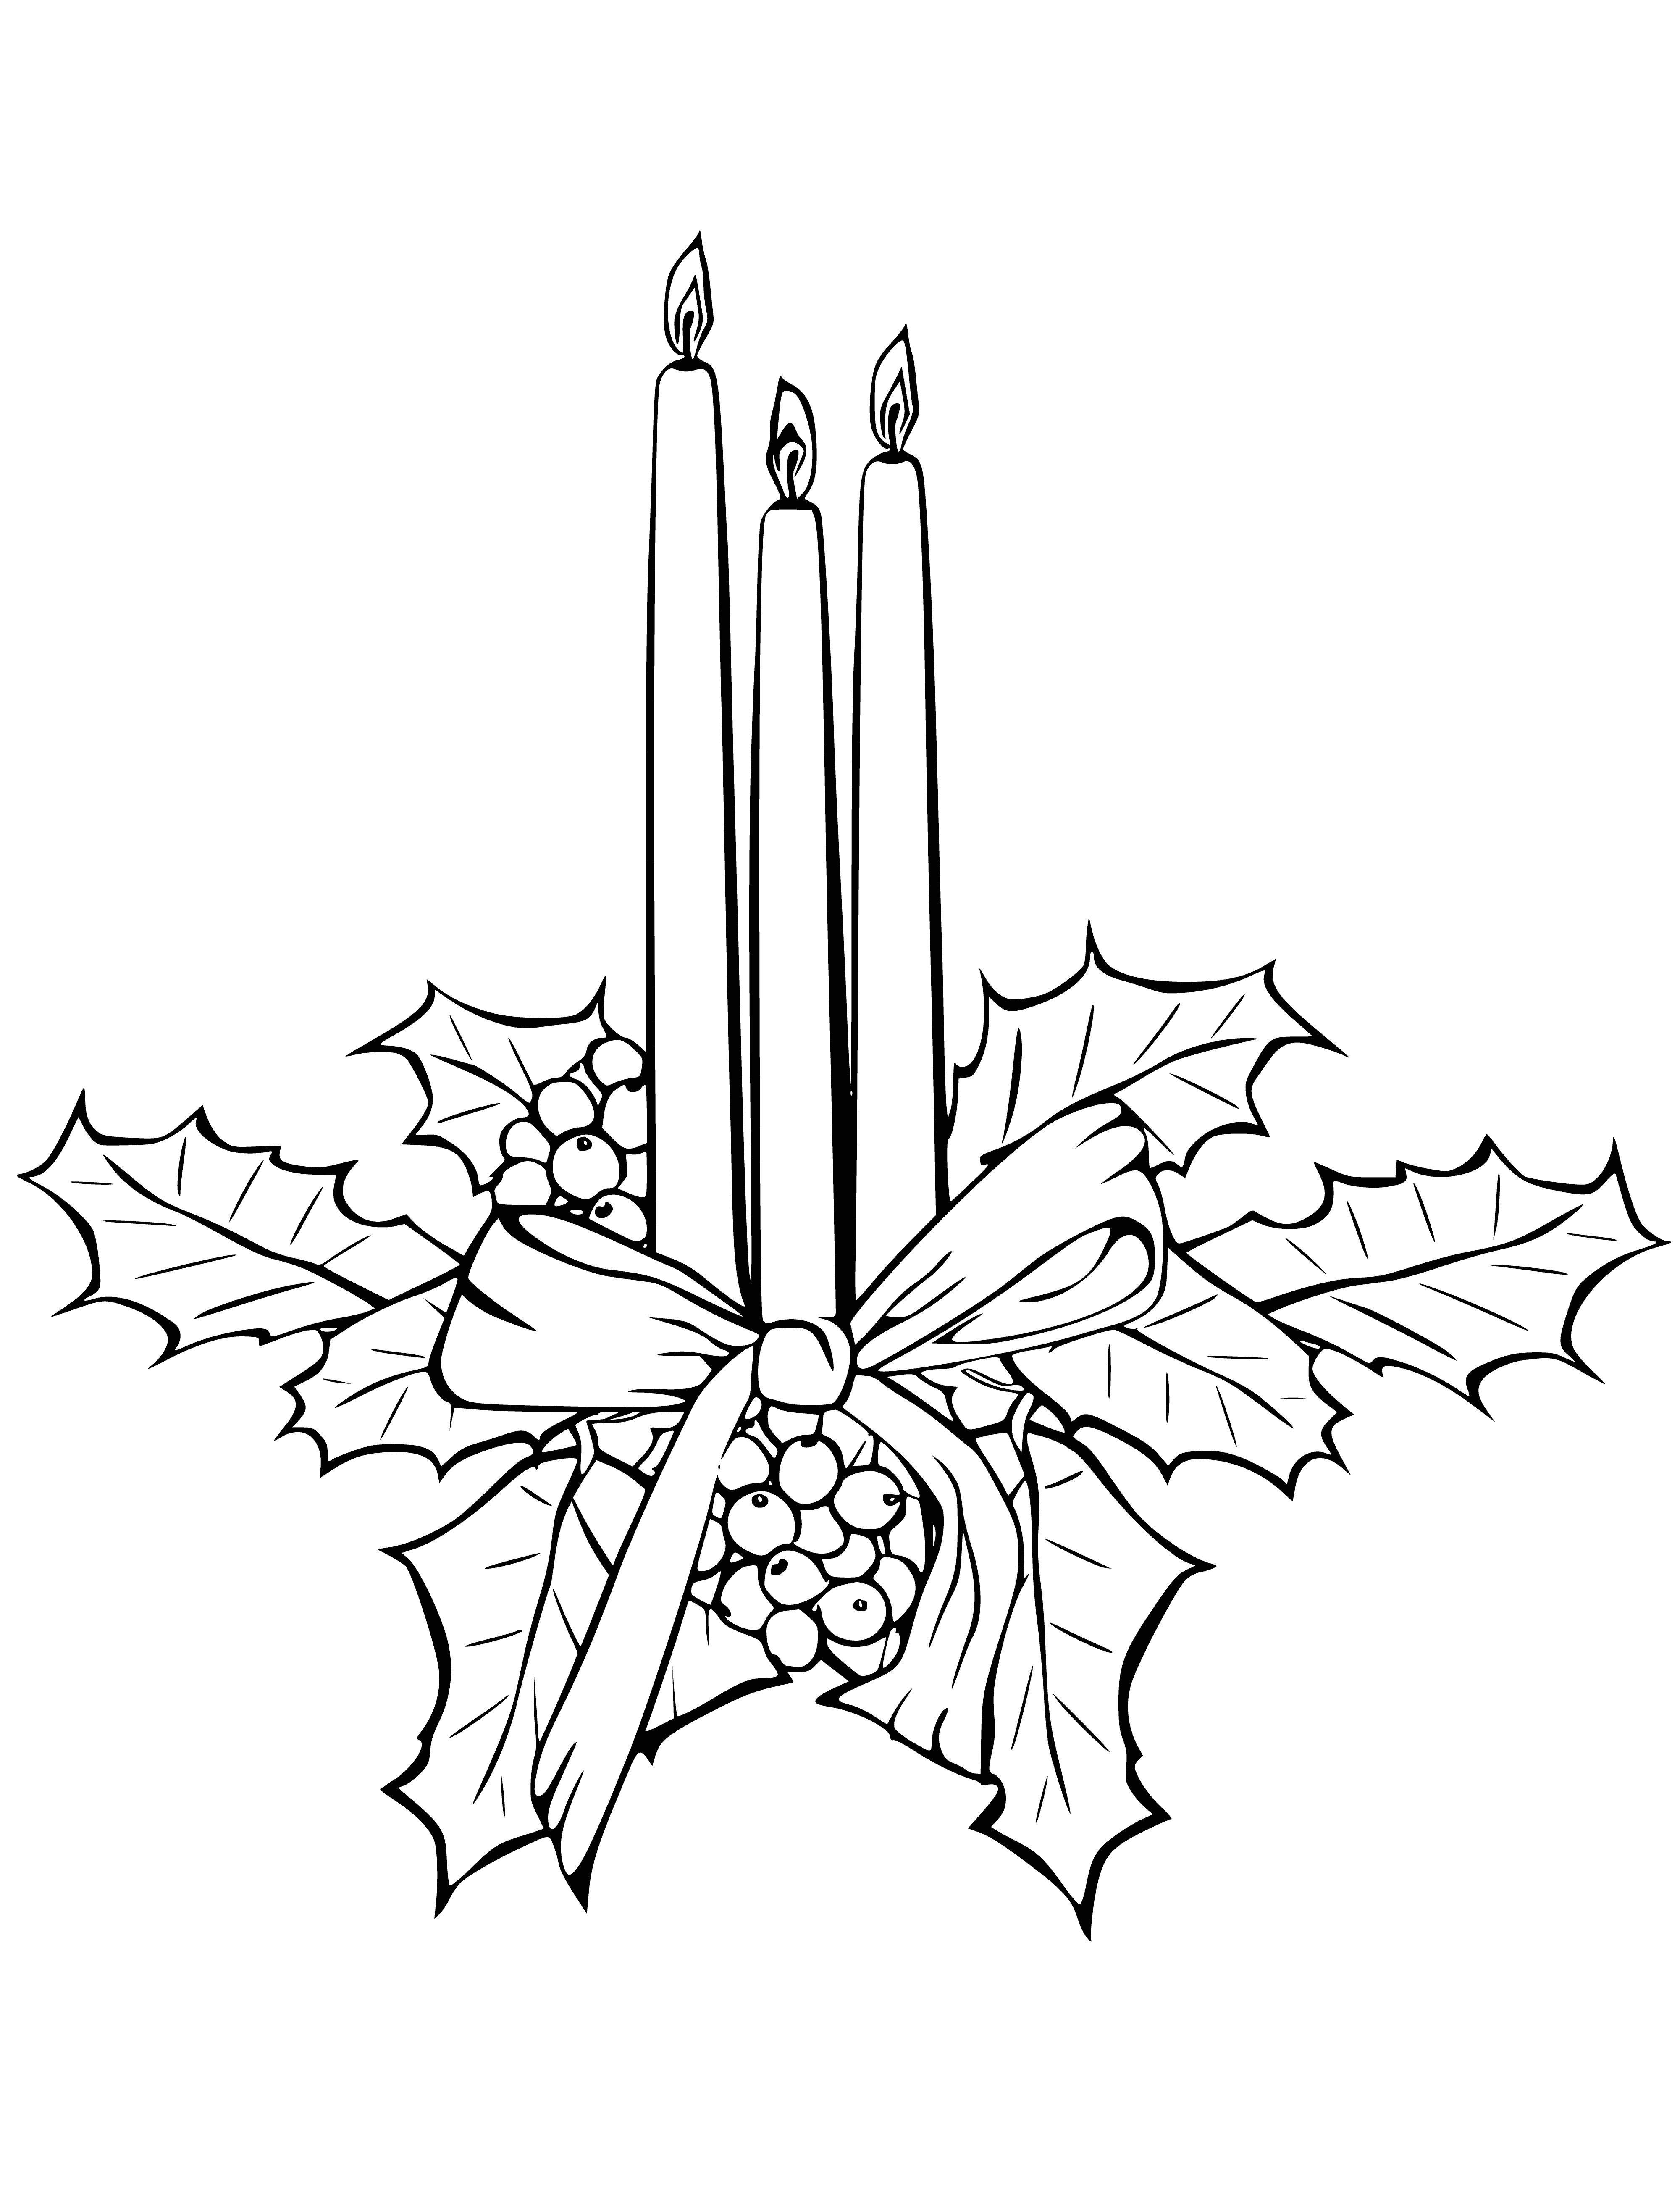 coloring page: 4 candles of varying heights (tallest in middle) surrounded by greens & berries - tallest white, 2 sml red. #romanticatmosphere